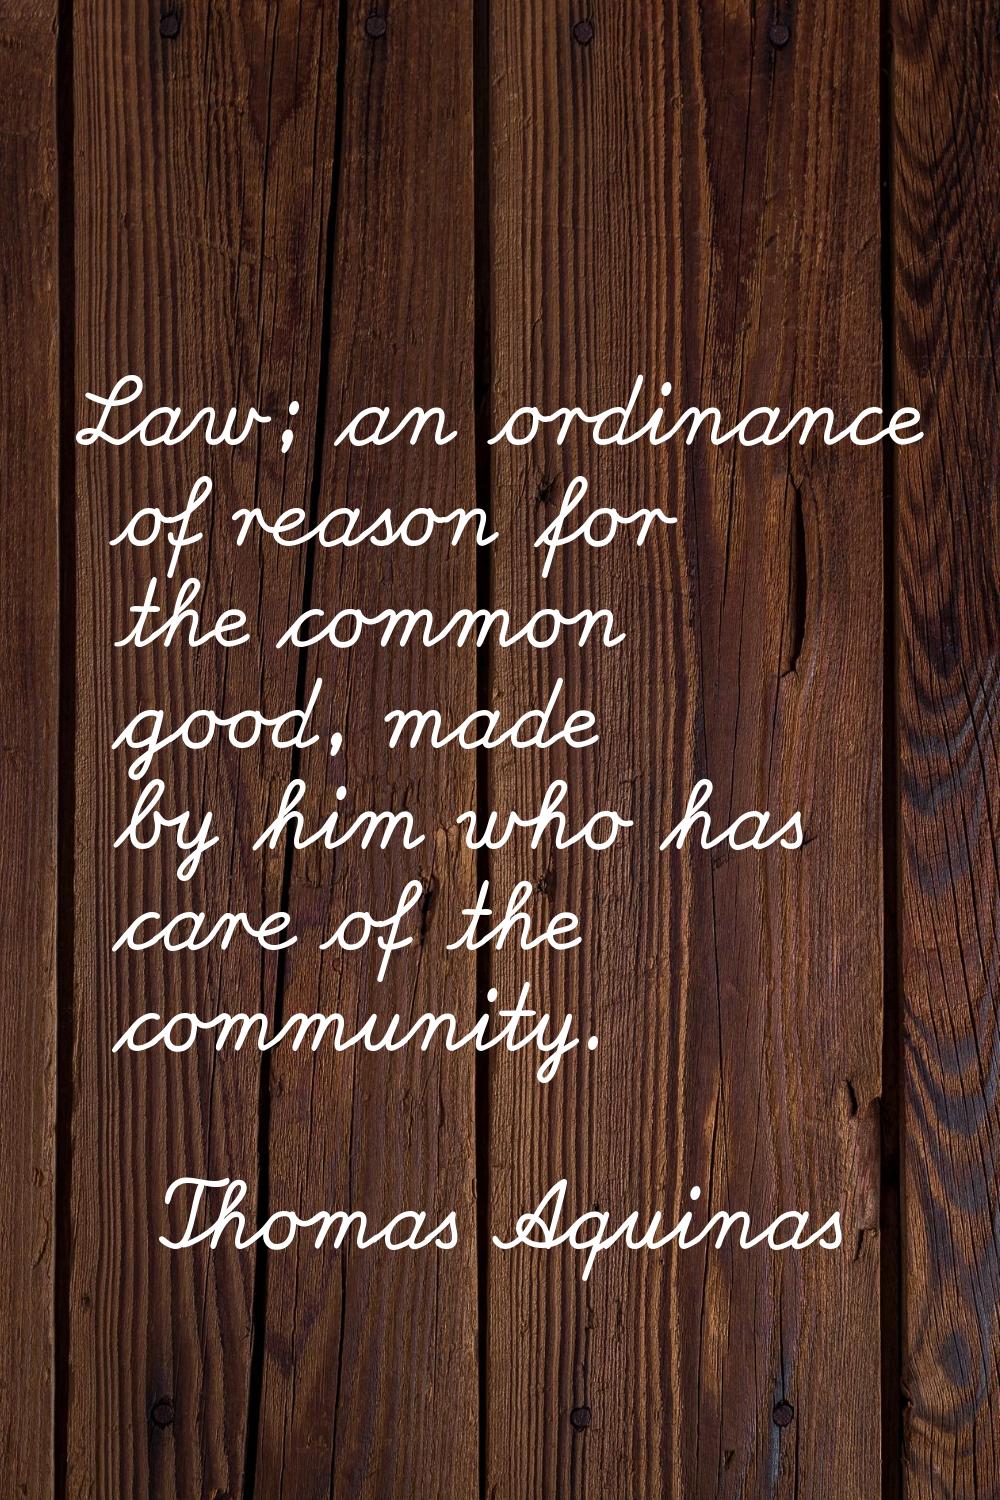 Law; an ordinance of reason for the common good, made by him who has care of the community.